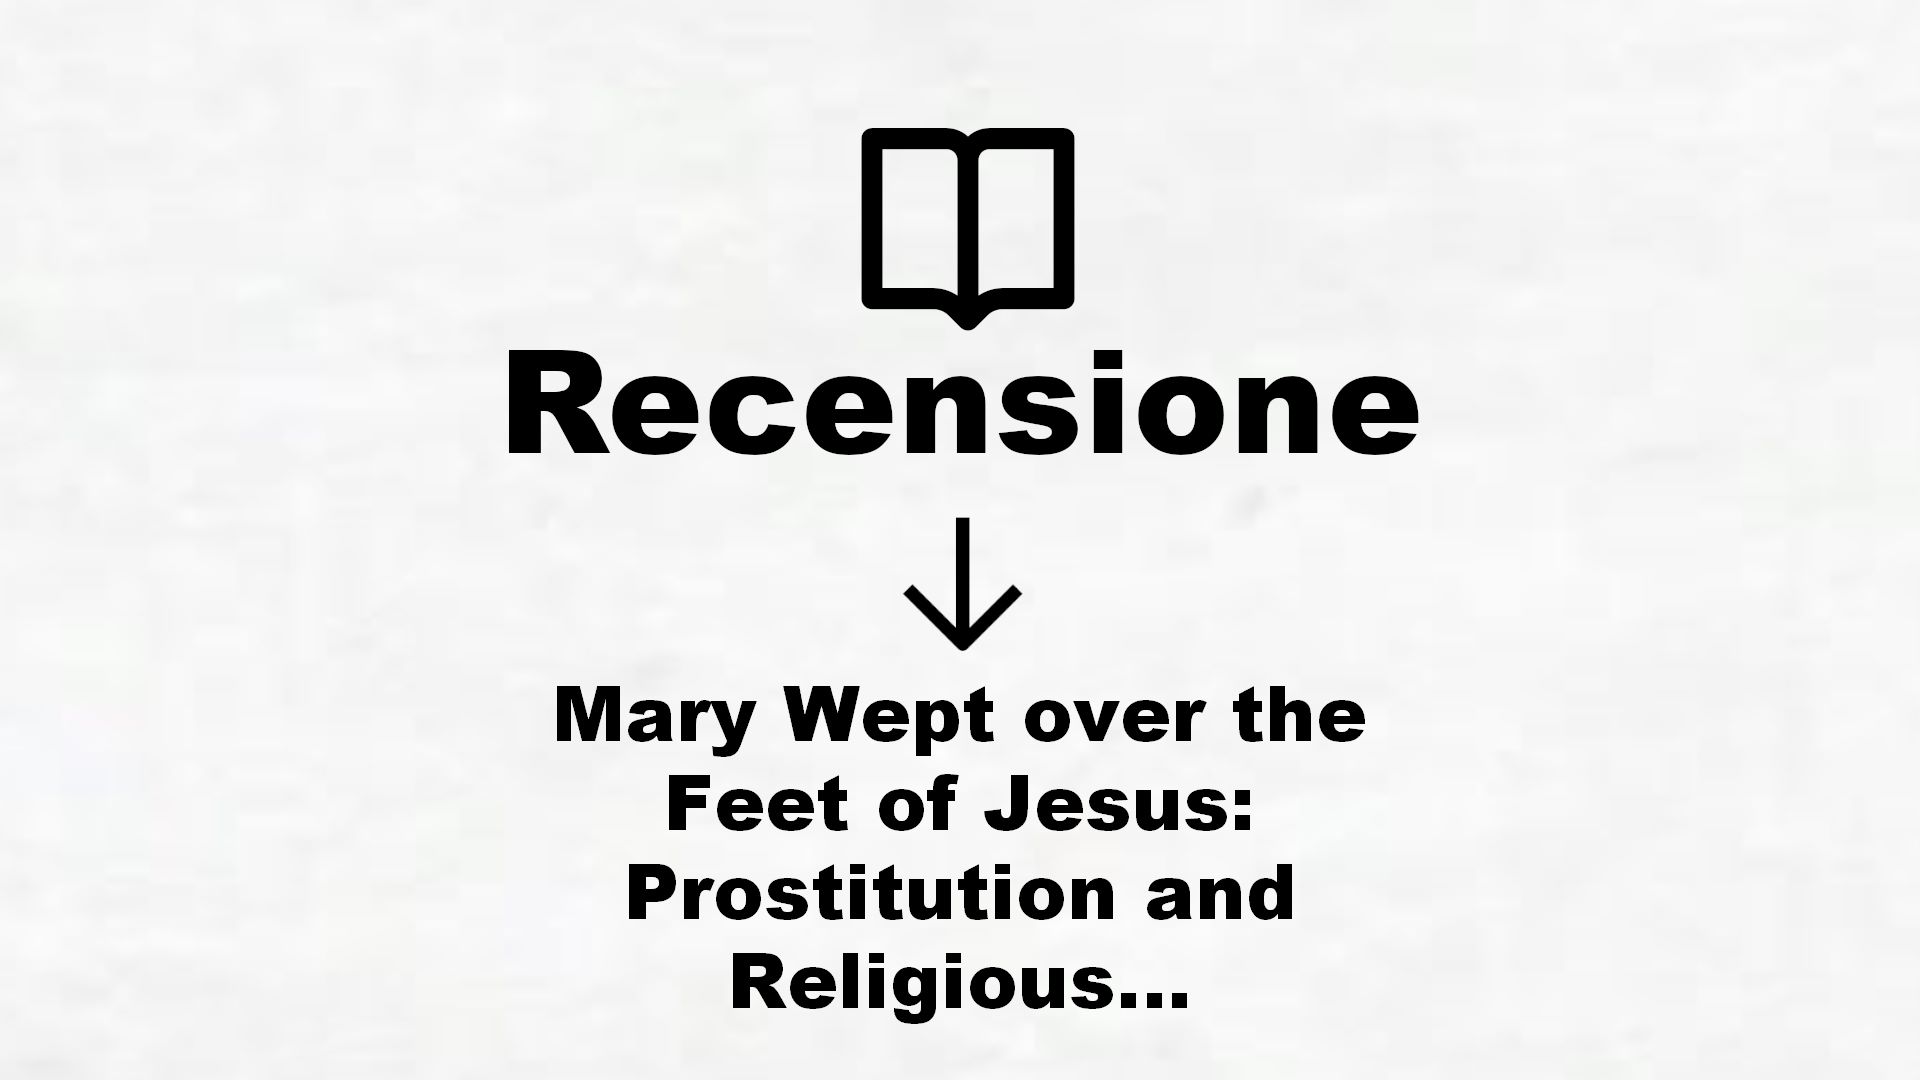 Mary Wept over the Feet of Jesus: Prostitution and Religious Obedience in the Bible – Recensione Libro